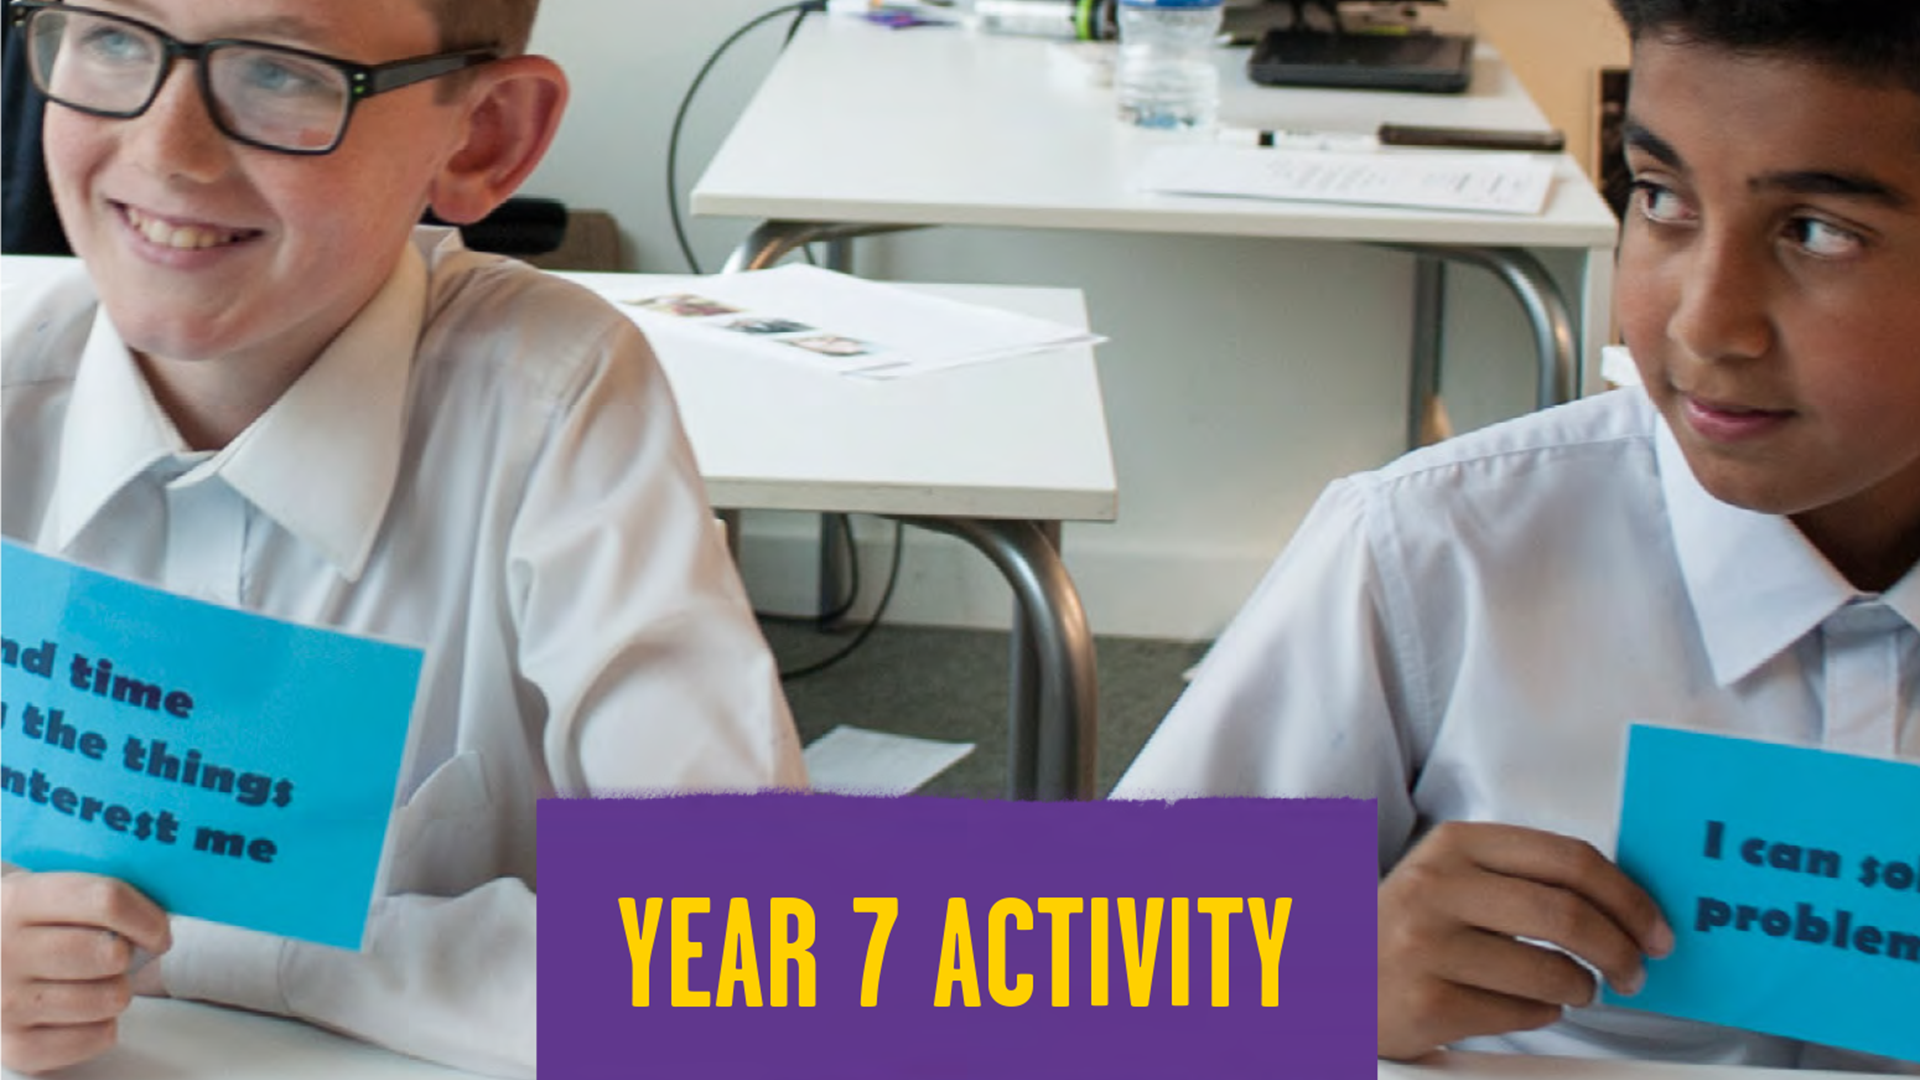 Two students sit next to each at a desk in a classroom holding blue cards with different statements on. In the middle of the students, there's a purple square with yellow writing. It says 'year 7 activity'.